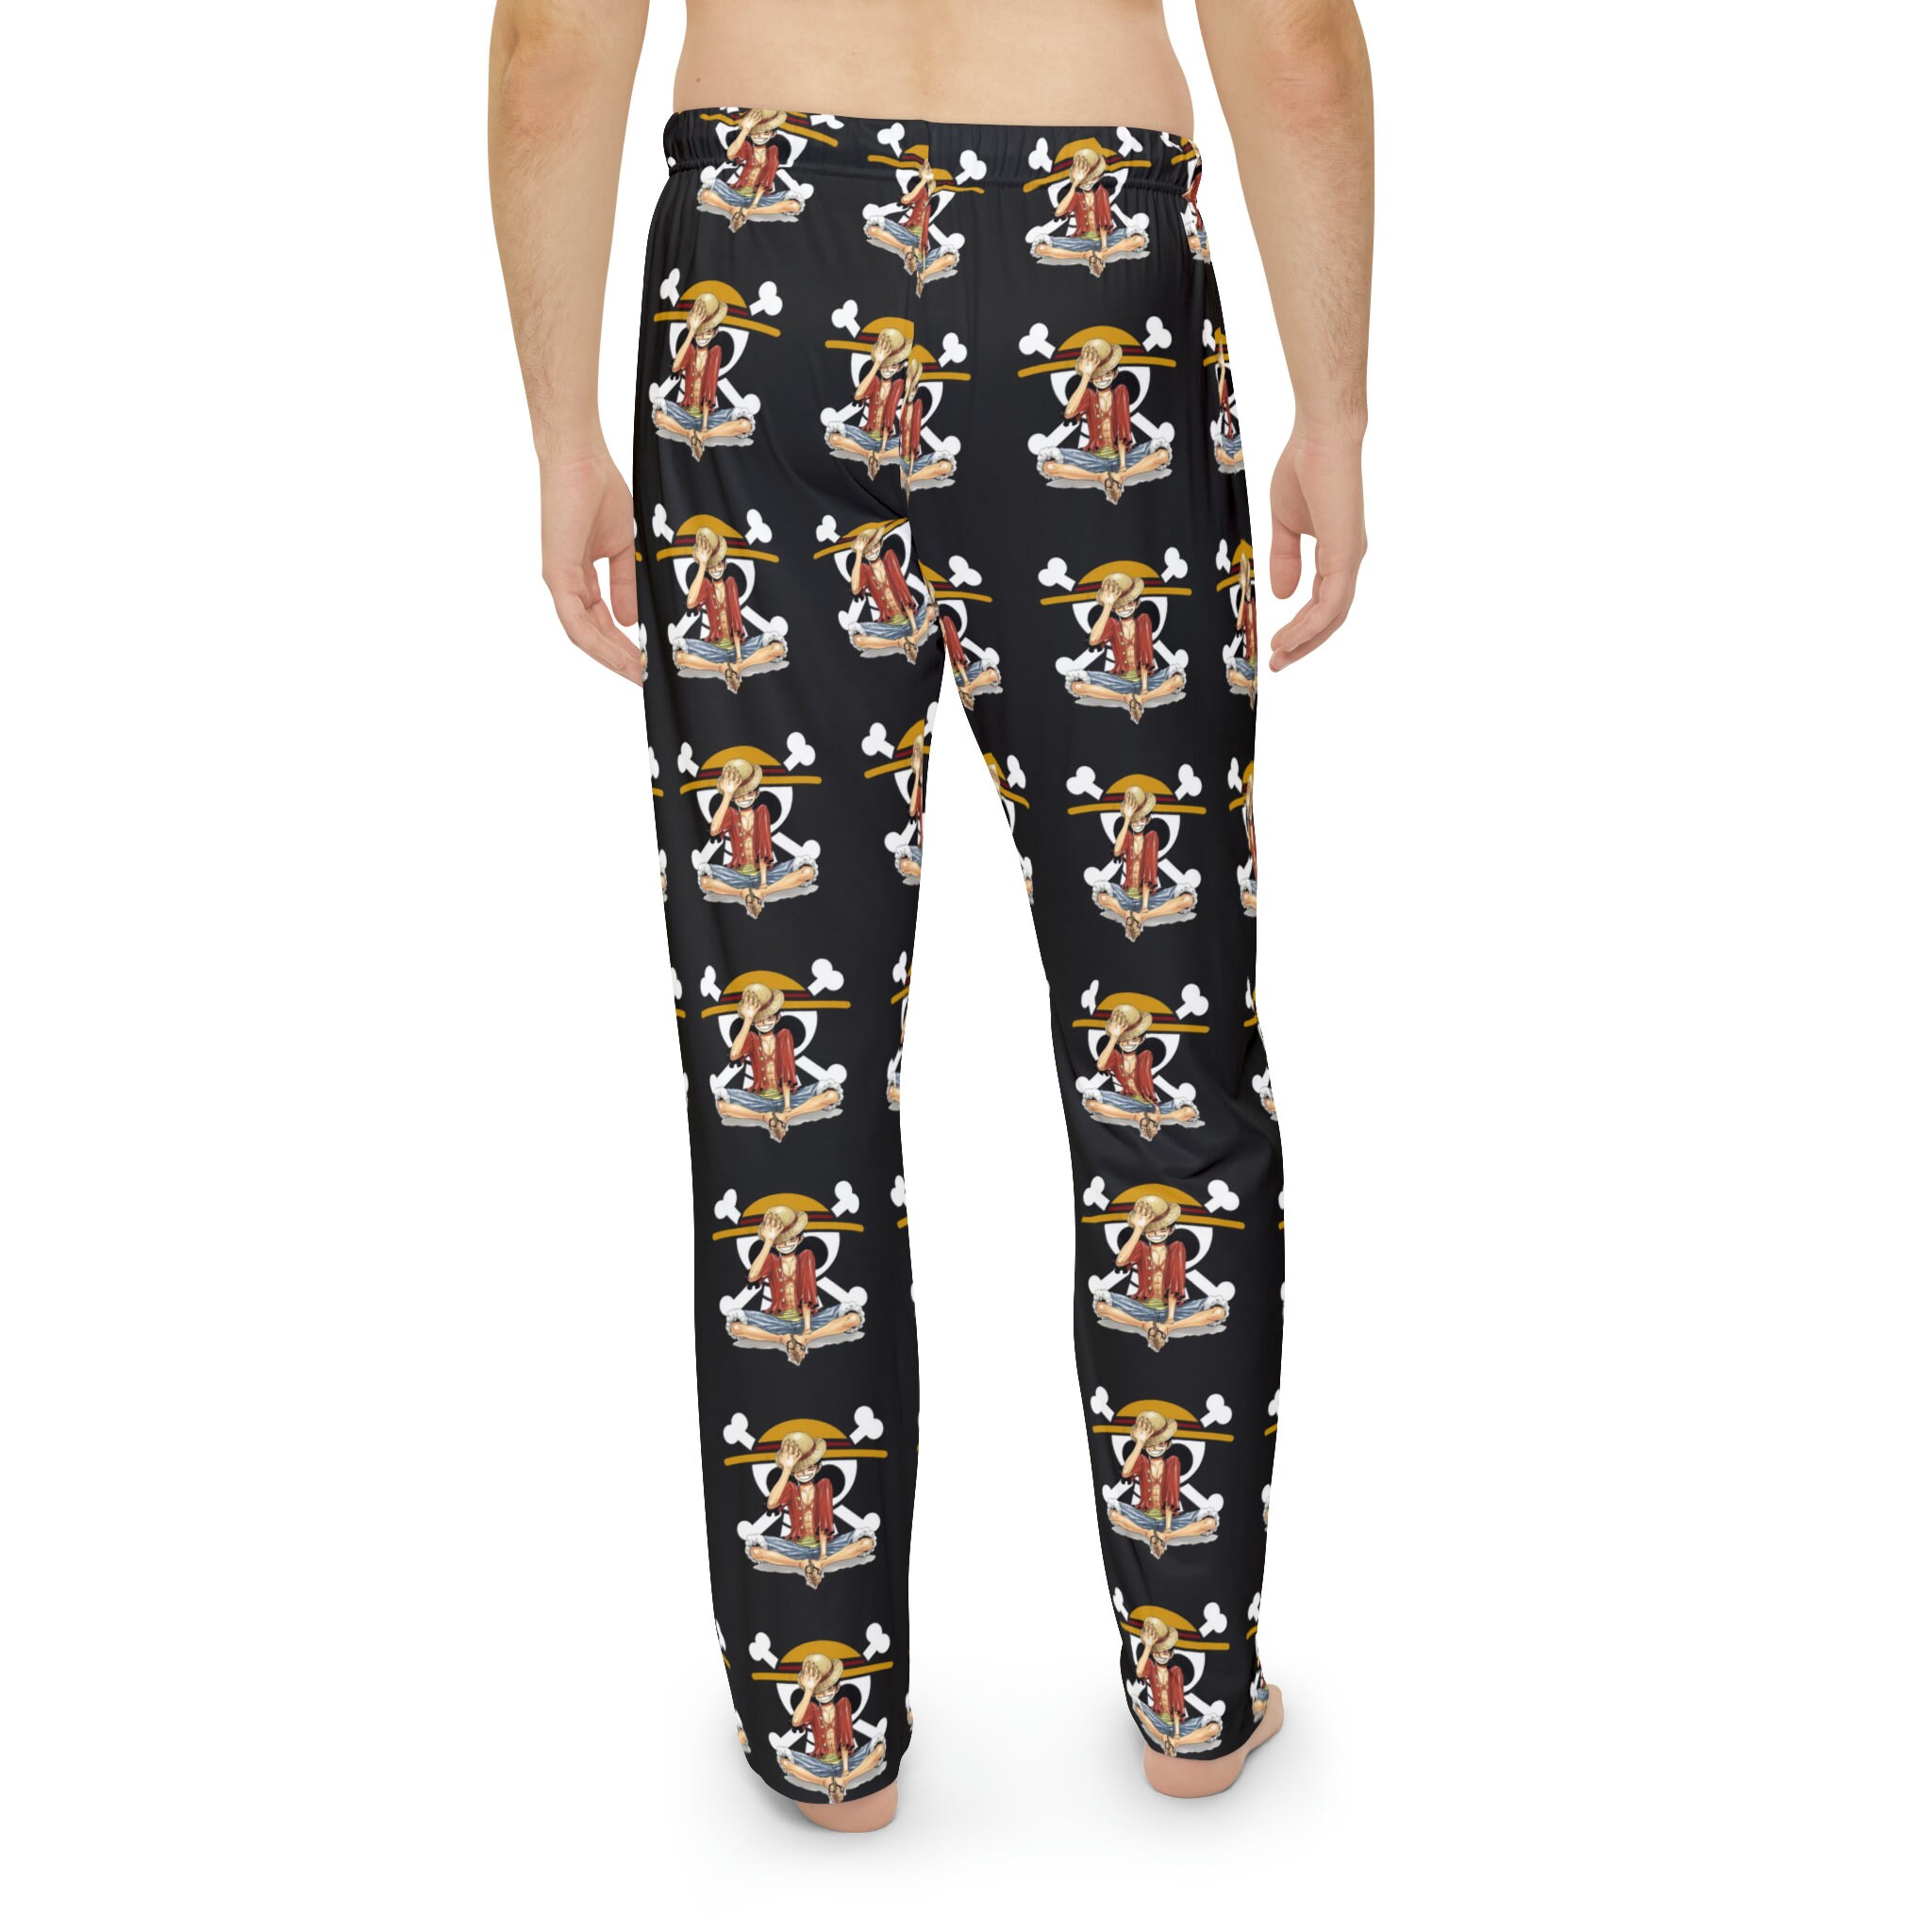 One Piece Collection Men's Pajama Pants - Etsy